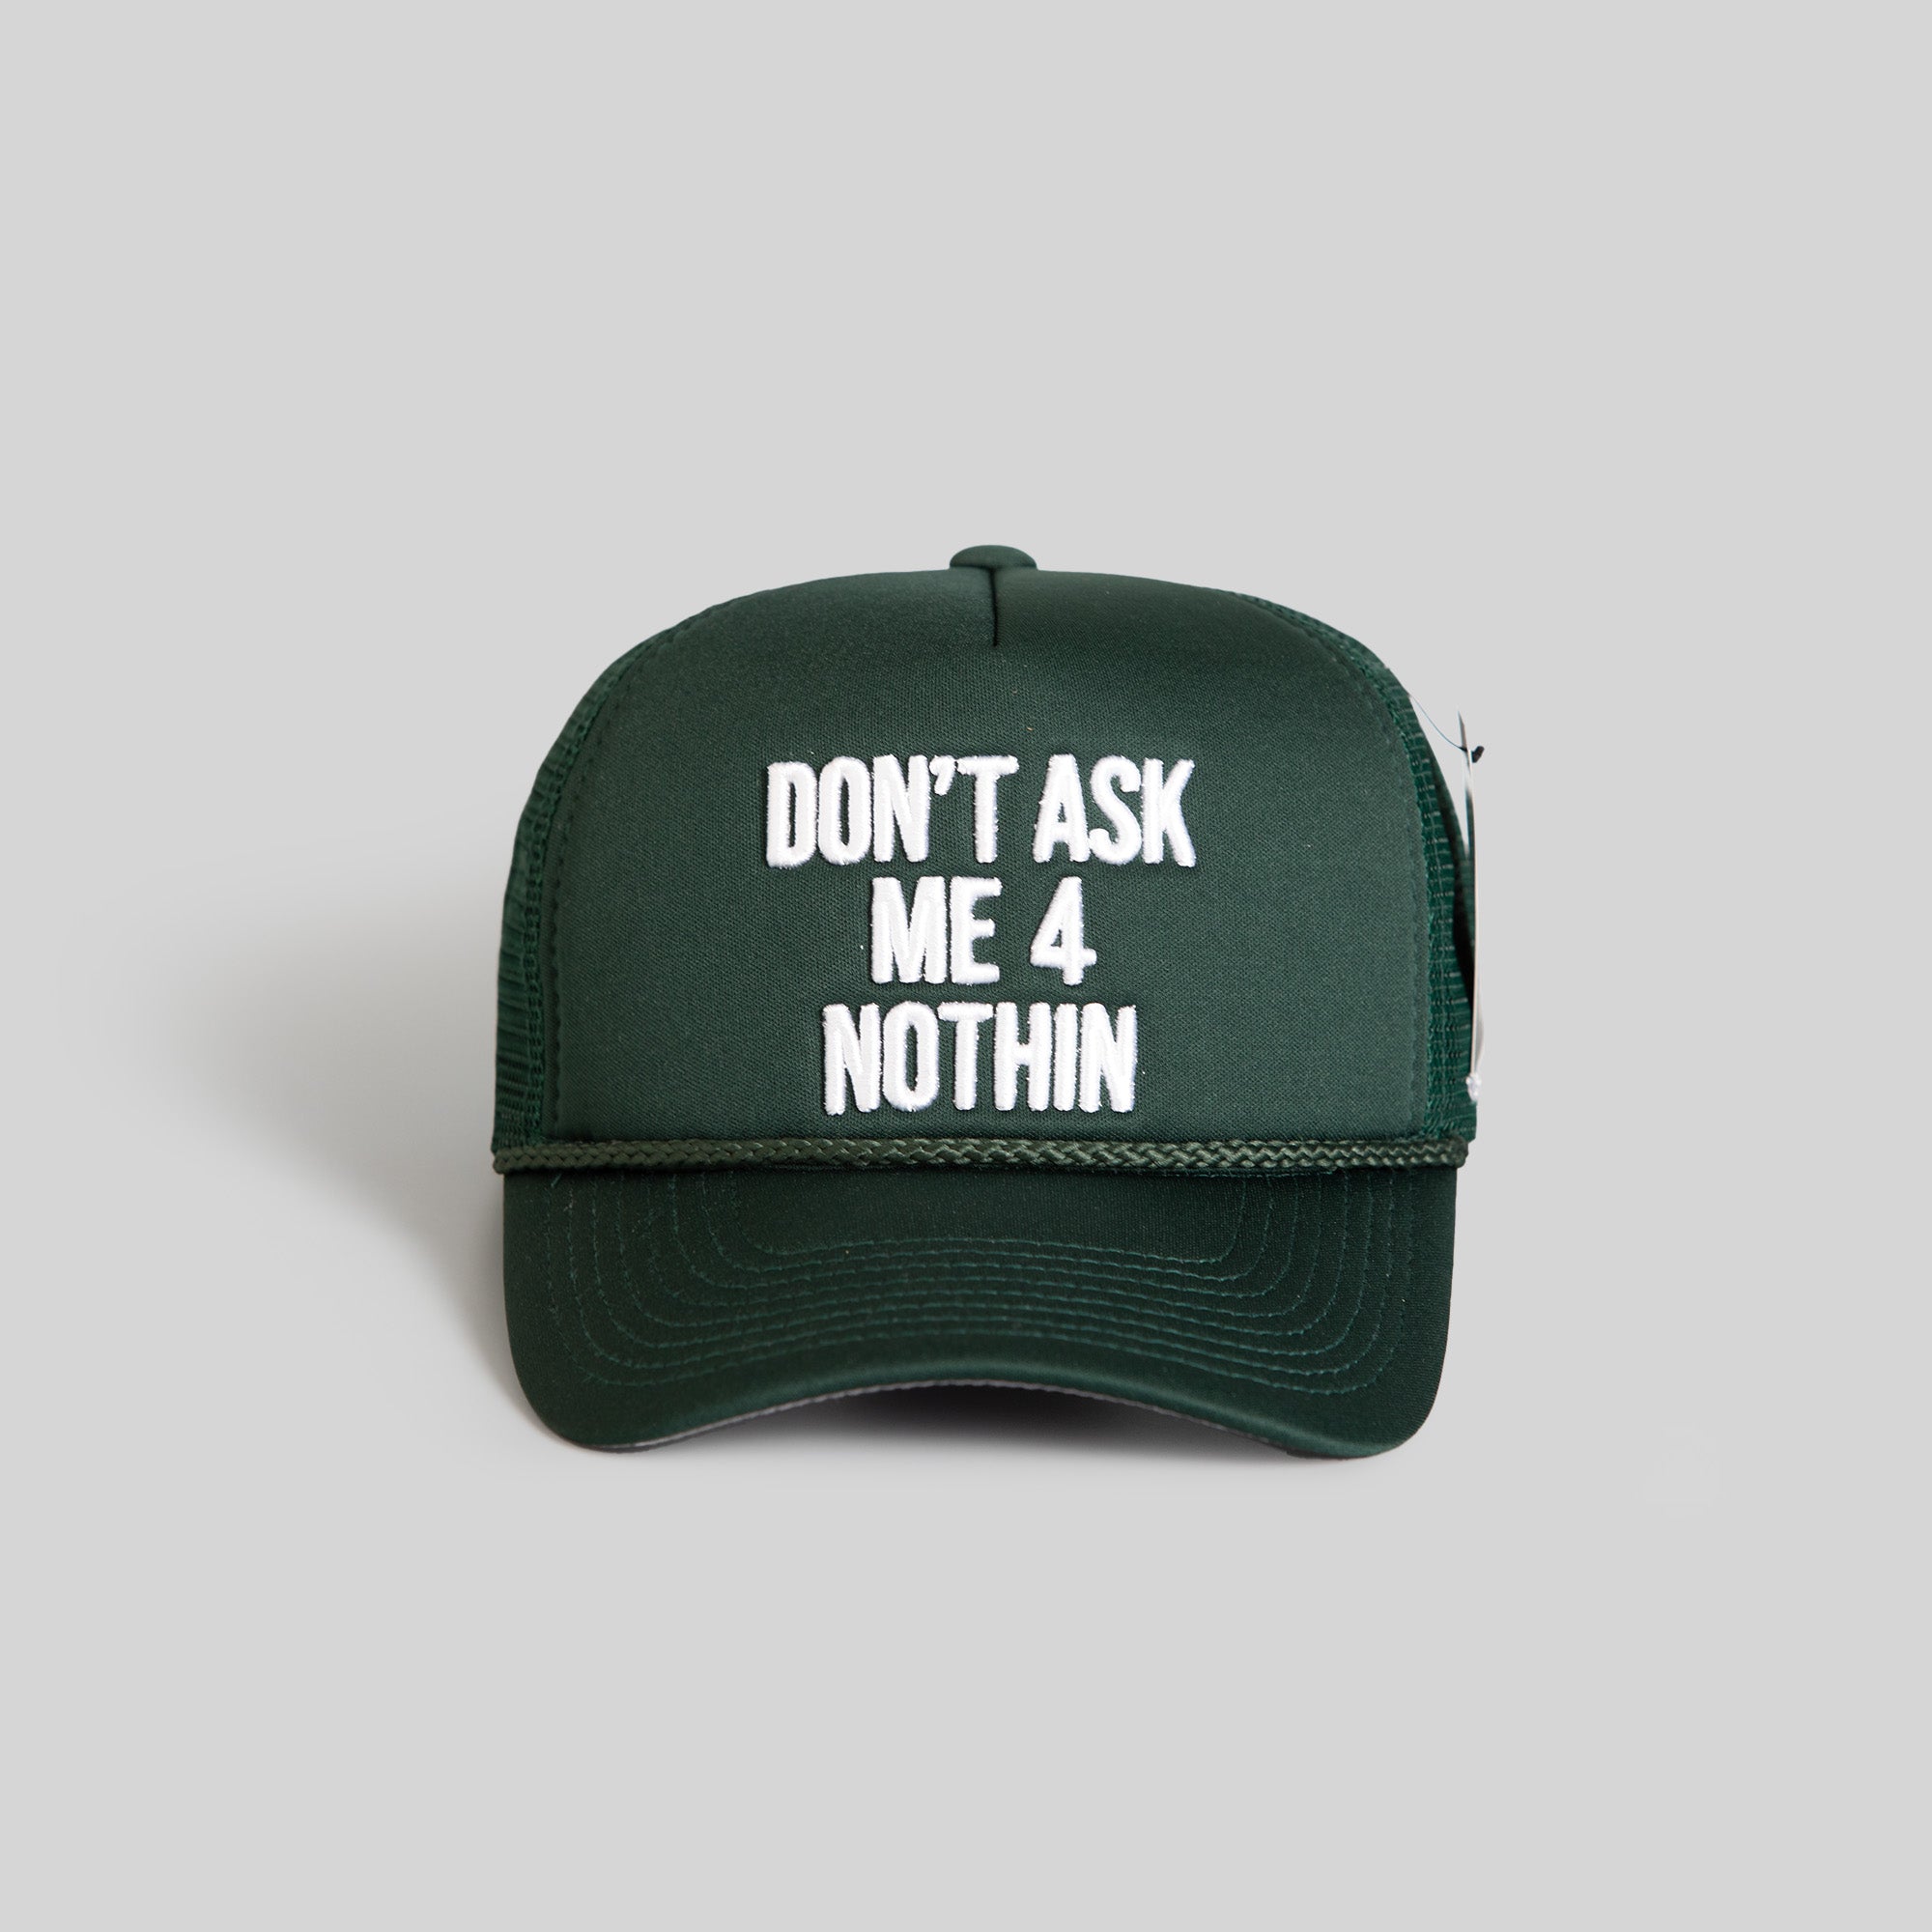 DON'T ASK ME FG GREEN TRUCKER HAT